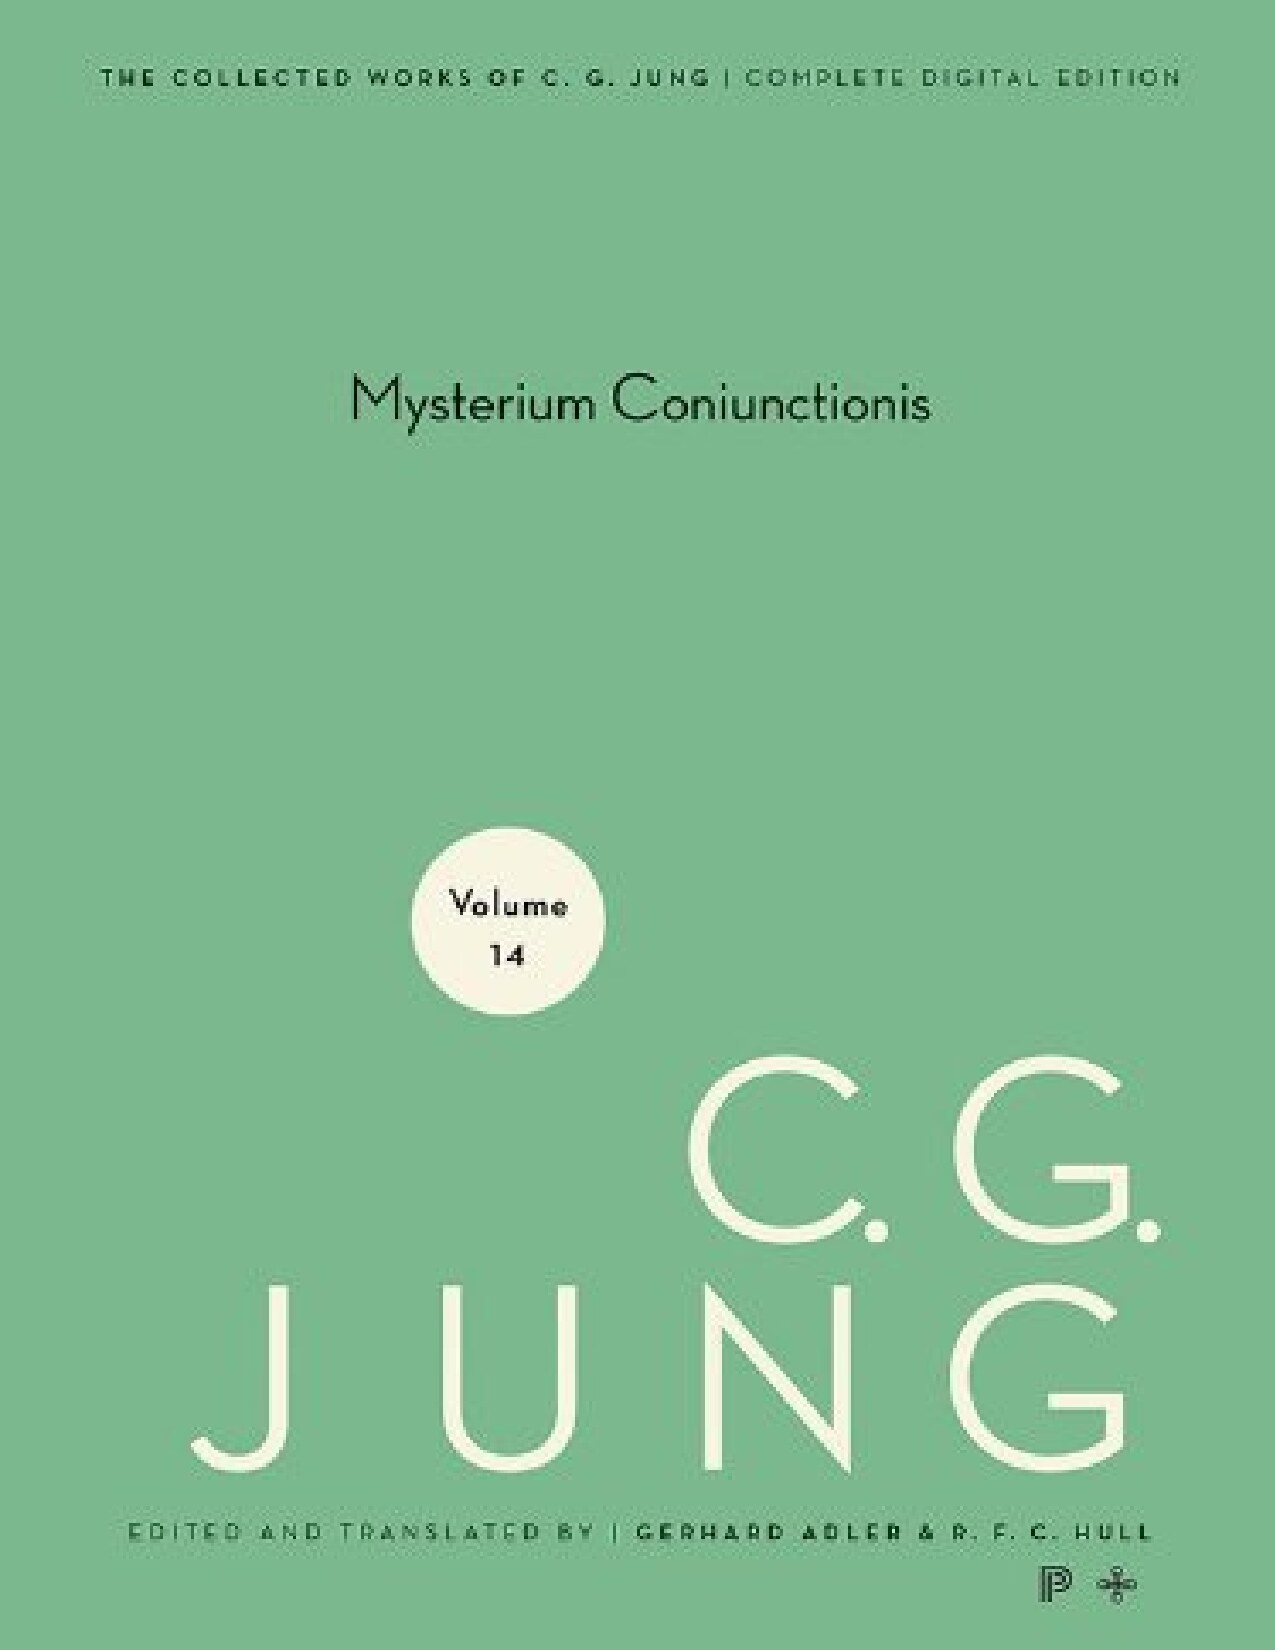 The Collected Works of C.G. Jung: Volume 14: Mysterium Coniunctionis